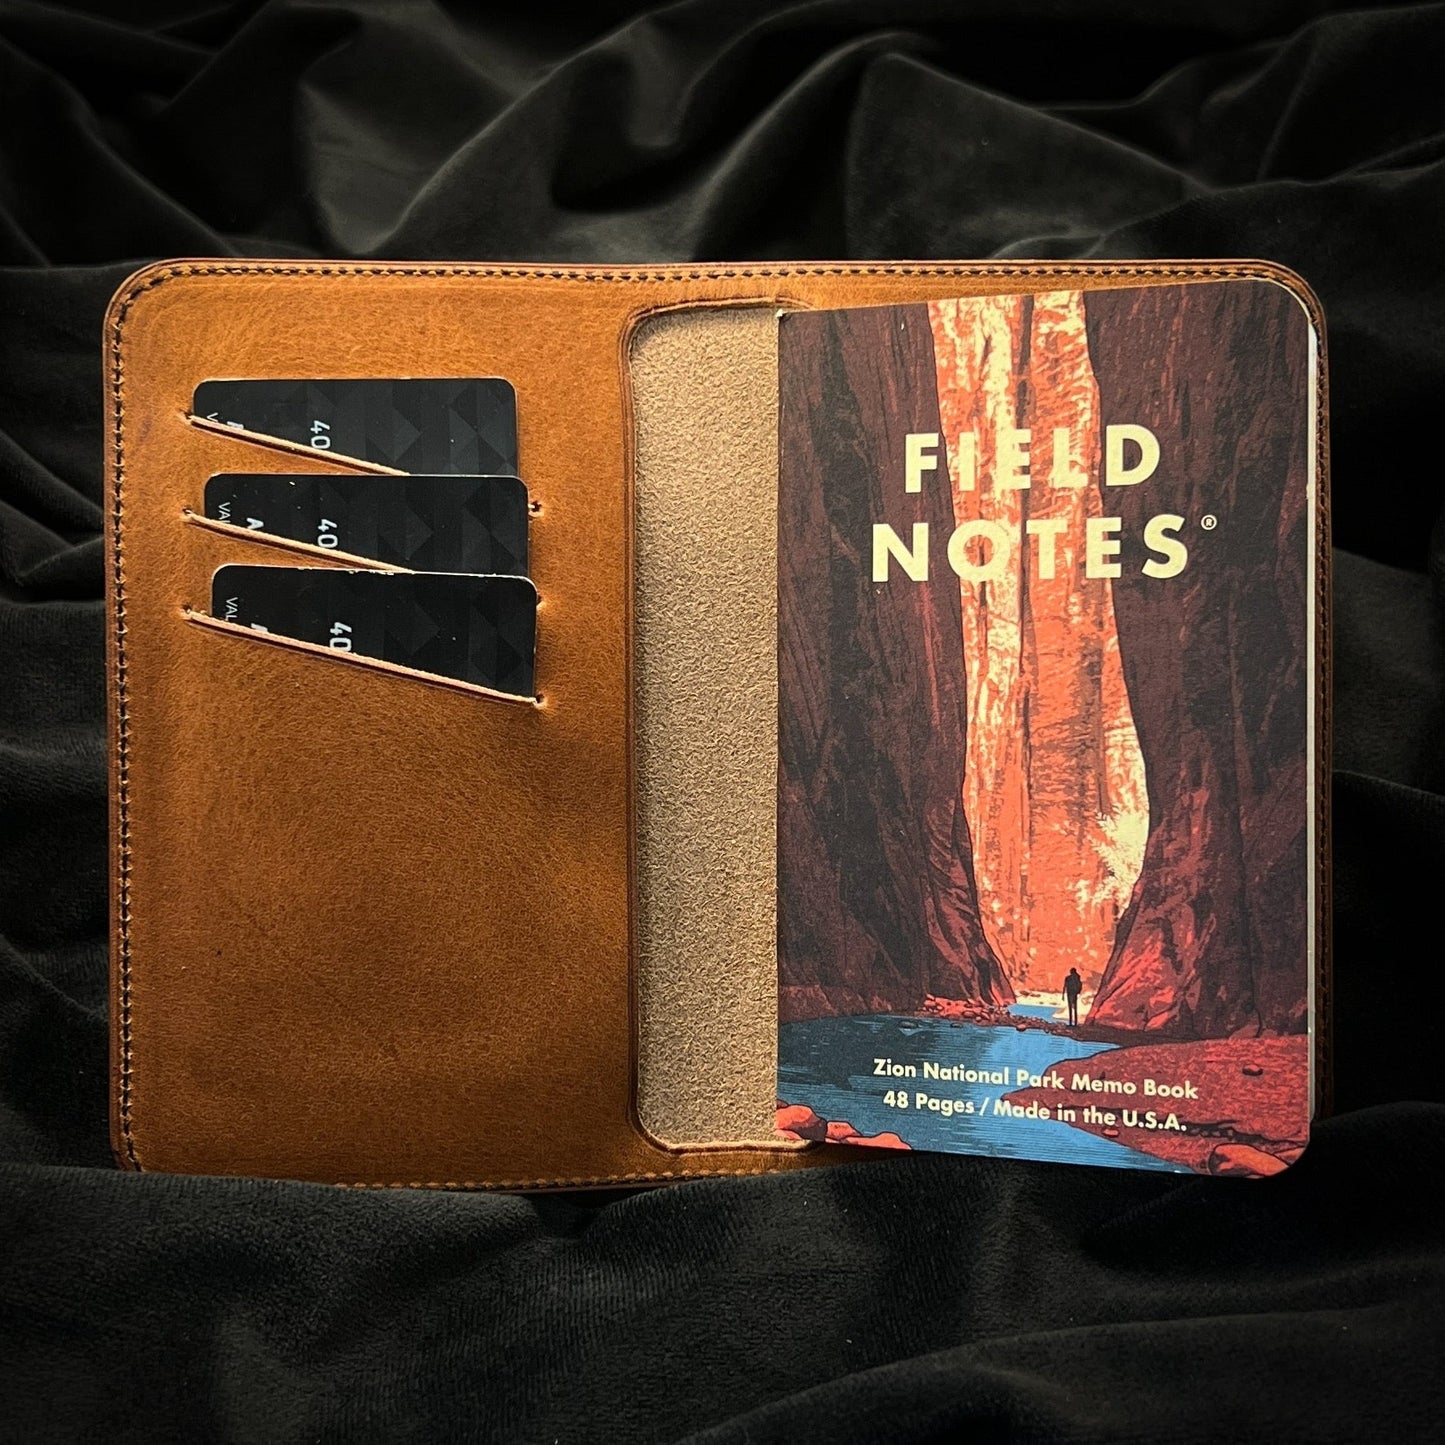 Custom Handmade Field Notes Journal Covers in Bourbon Horween Leather | Handmade in Houston | Custom Leather and Pen